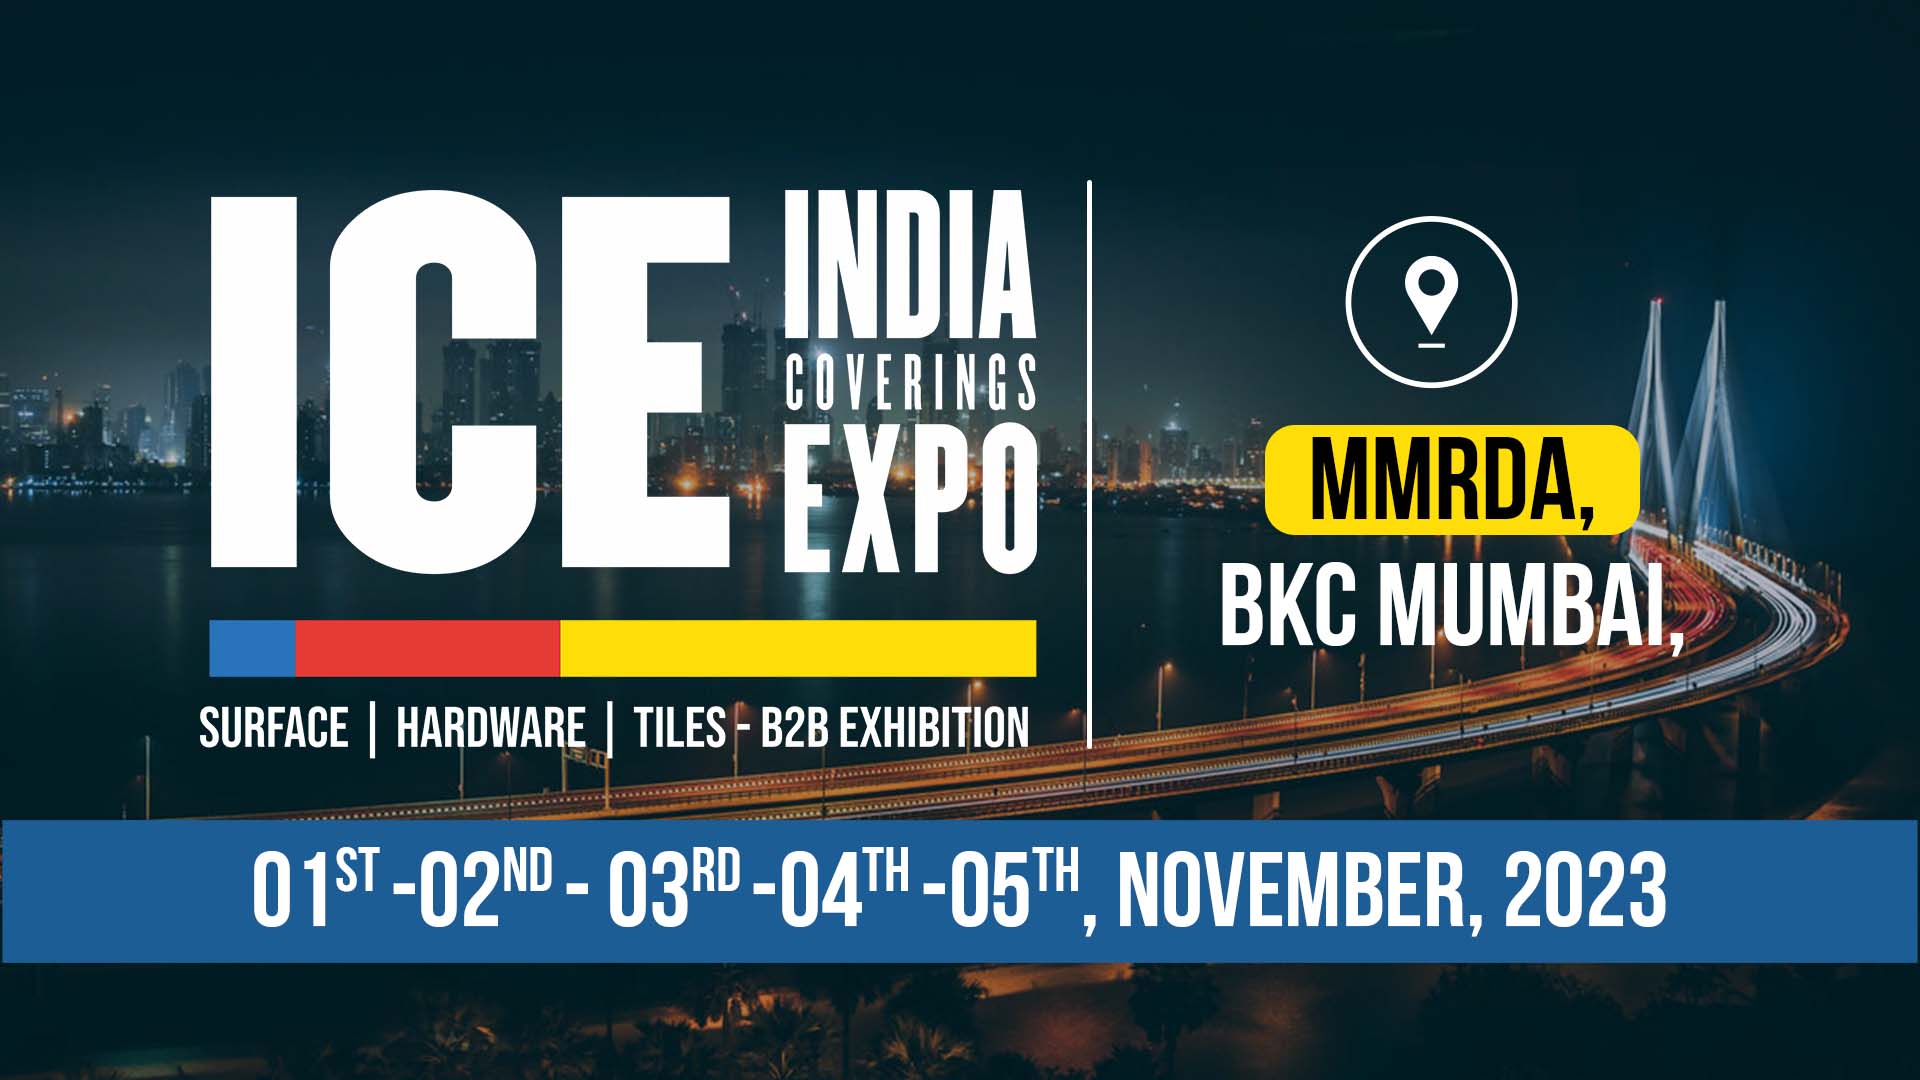 ICE Expo India Covering Expo